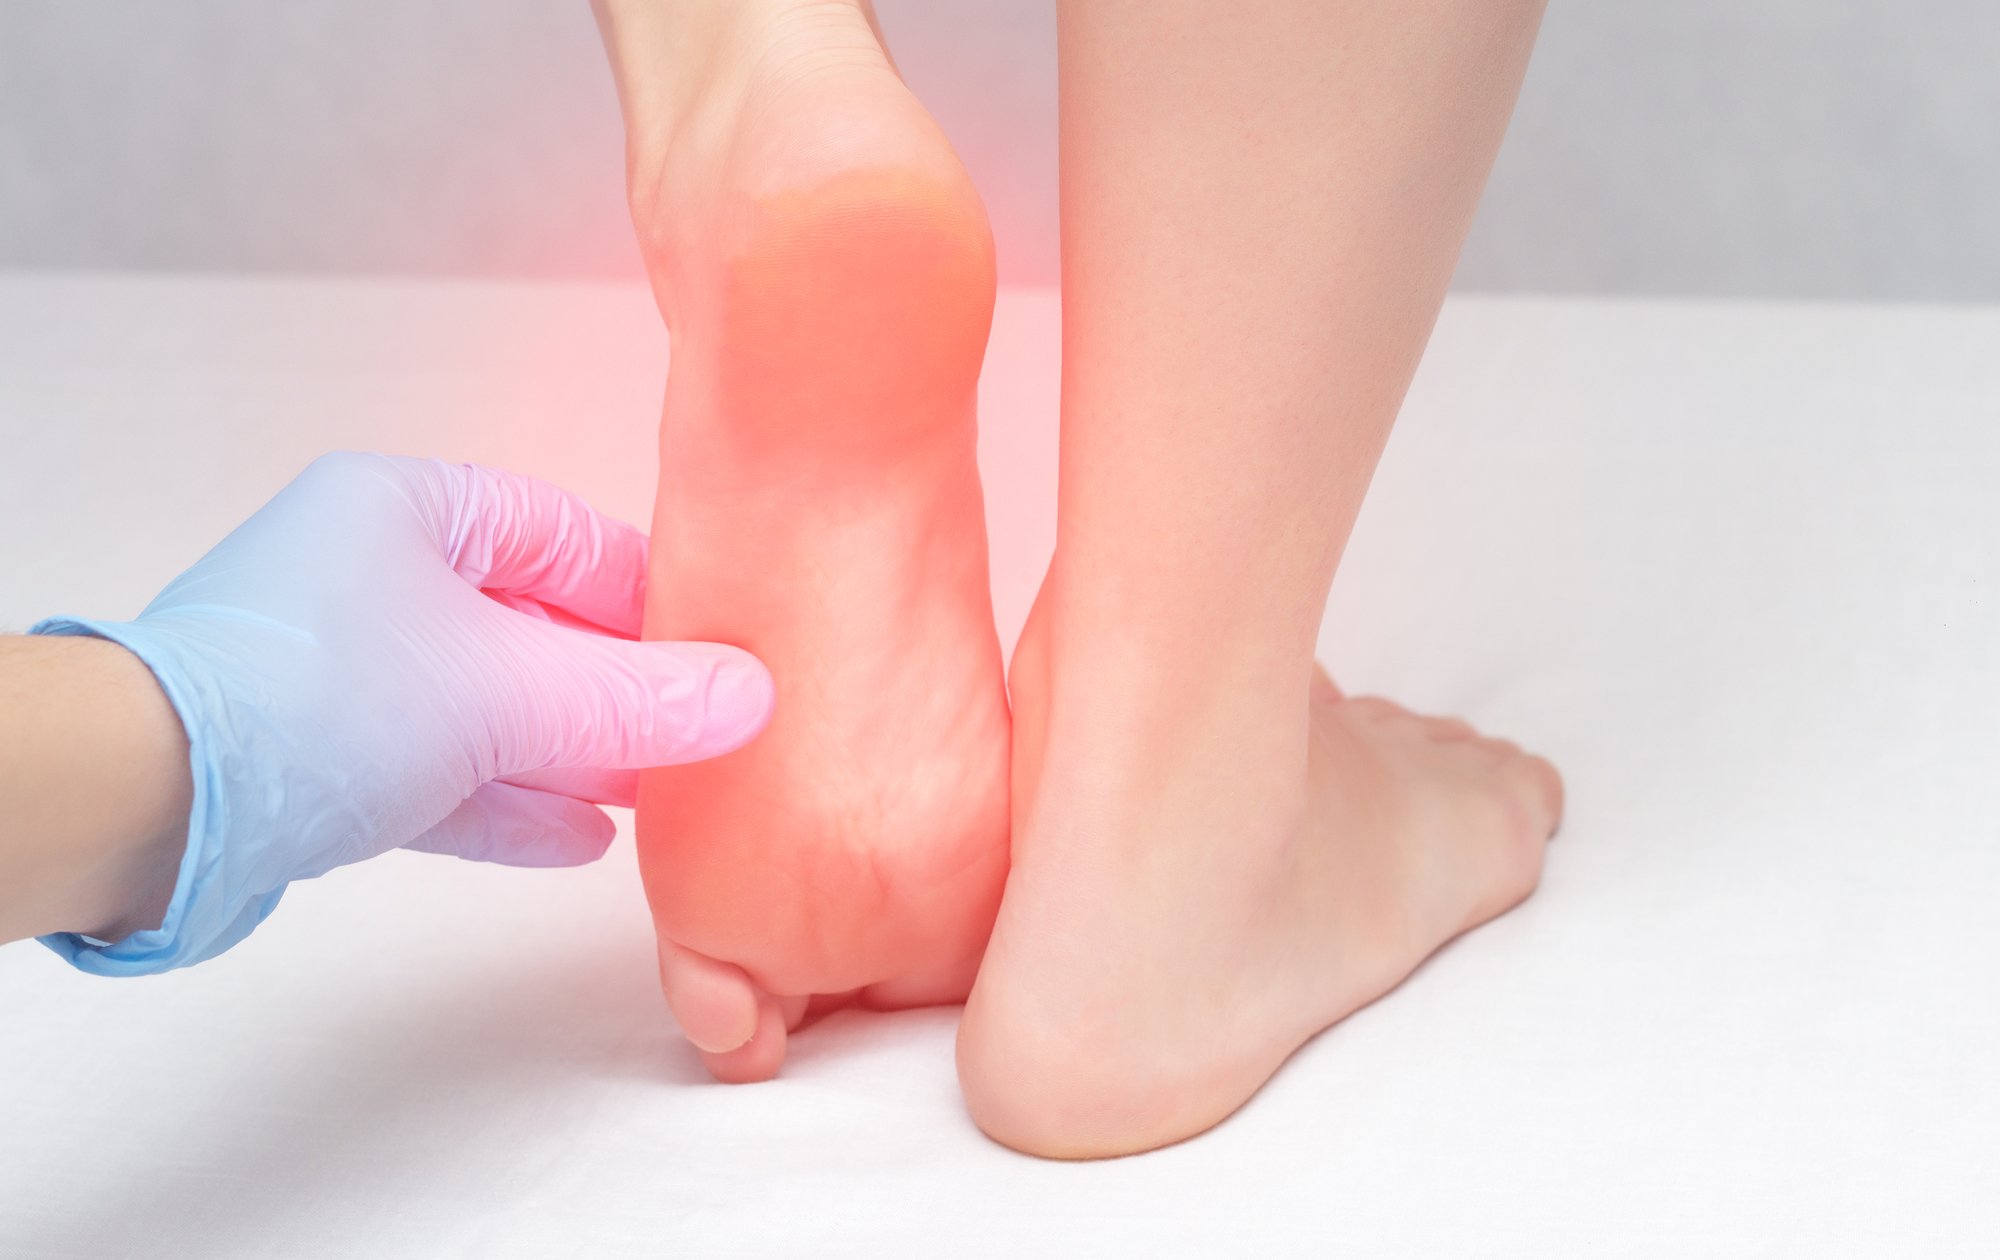 Heel Spurs: An Overview of Symptoms, Causes, and Treatments